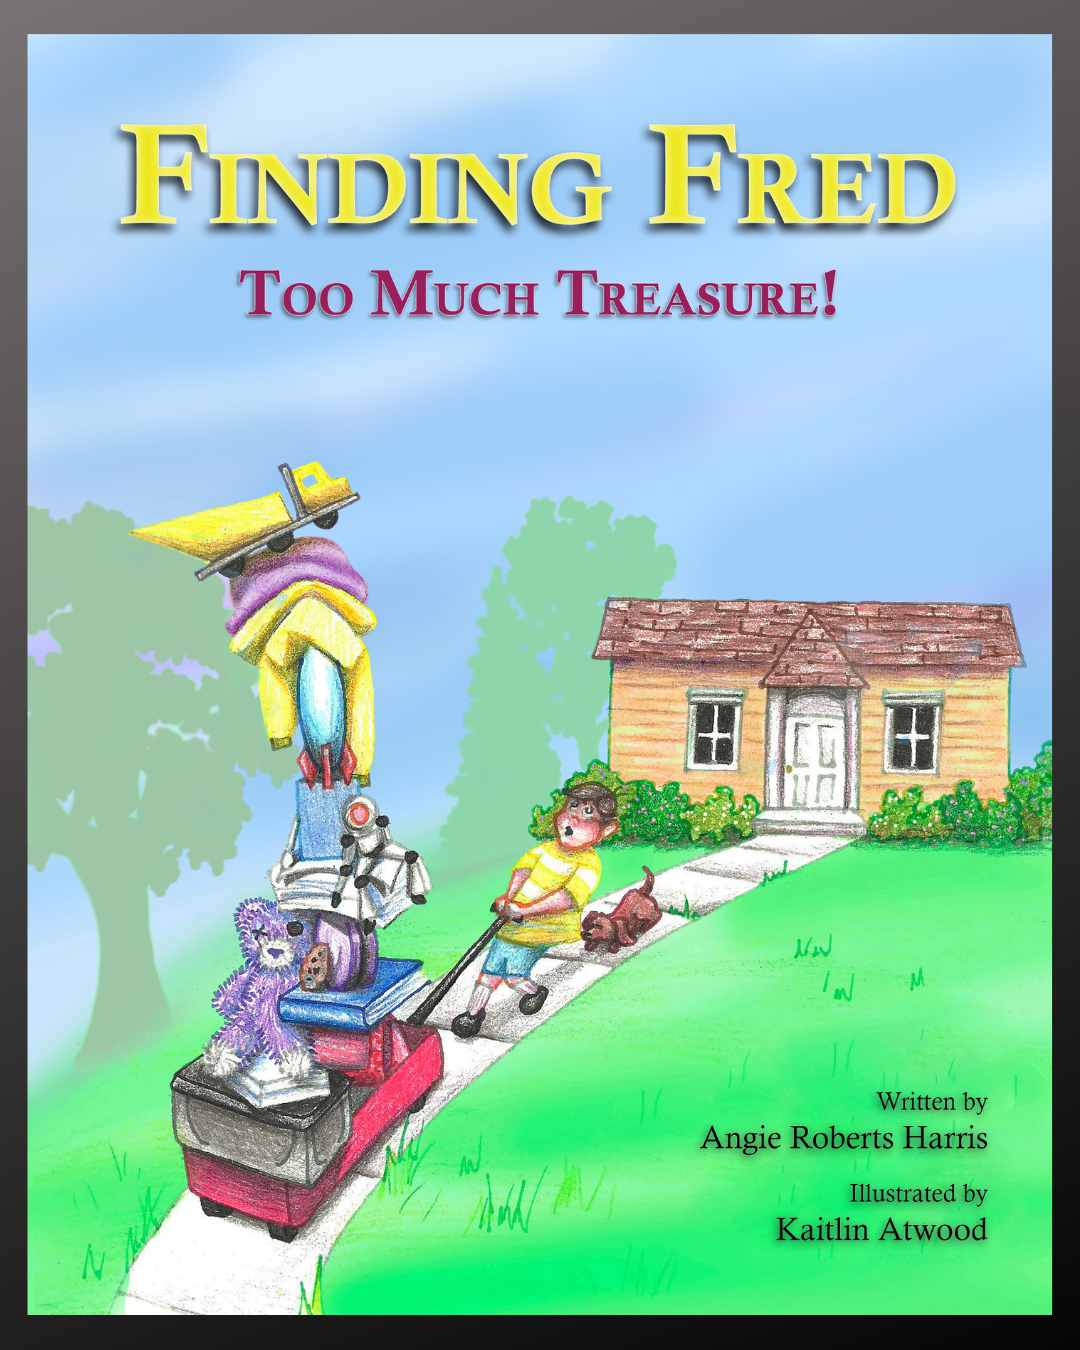 An image of a person holding a children's book titled "Finding Fred Too Much Treasure!" The cover features colorful illustrations: at the forefront, a child wearing a yellow shirt and shorts is walking a small brown dog. Behind them, a quirky, purple creature wearing goggles is sitting on top of a stack of books, riding a red lawnmower. In the background, there's a cozy-looking house with greenery. The sky above is a soft, faded blue with clouds. The book is written by Angie Roberts Harris and illustrated by Kaitlin Atwood. The illustration style is playful and vibrant, suggesting an adventurous tone for the book's content.